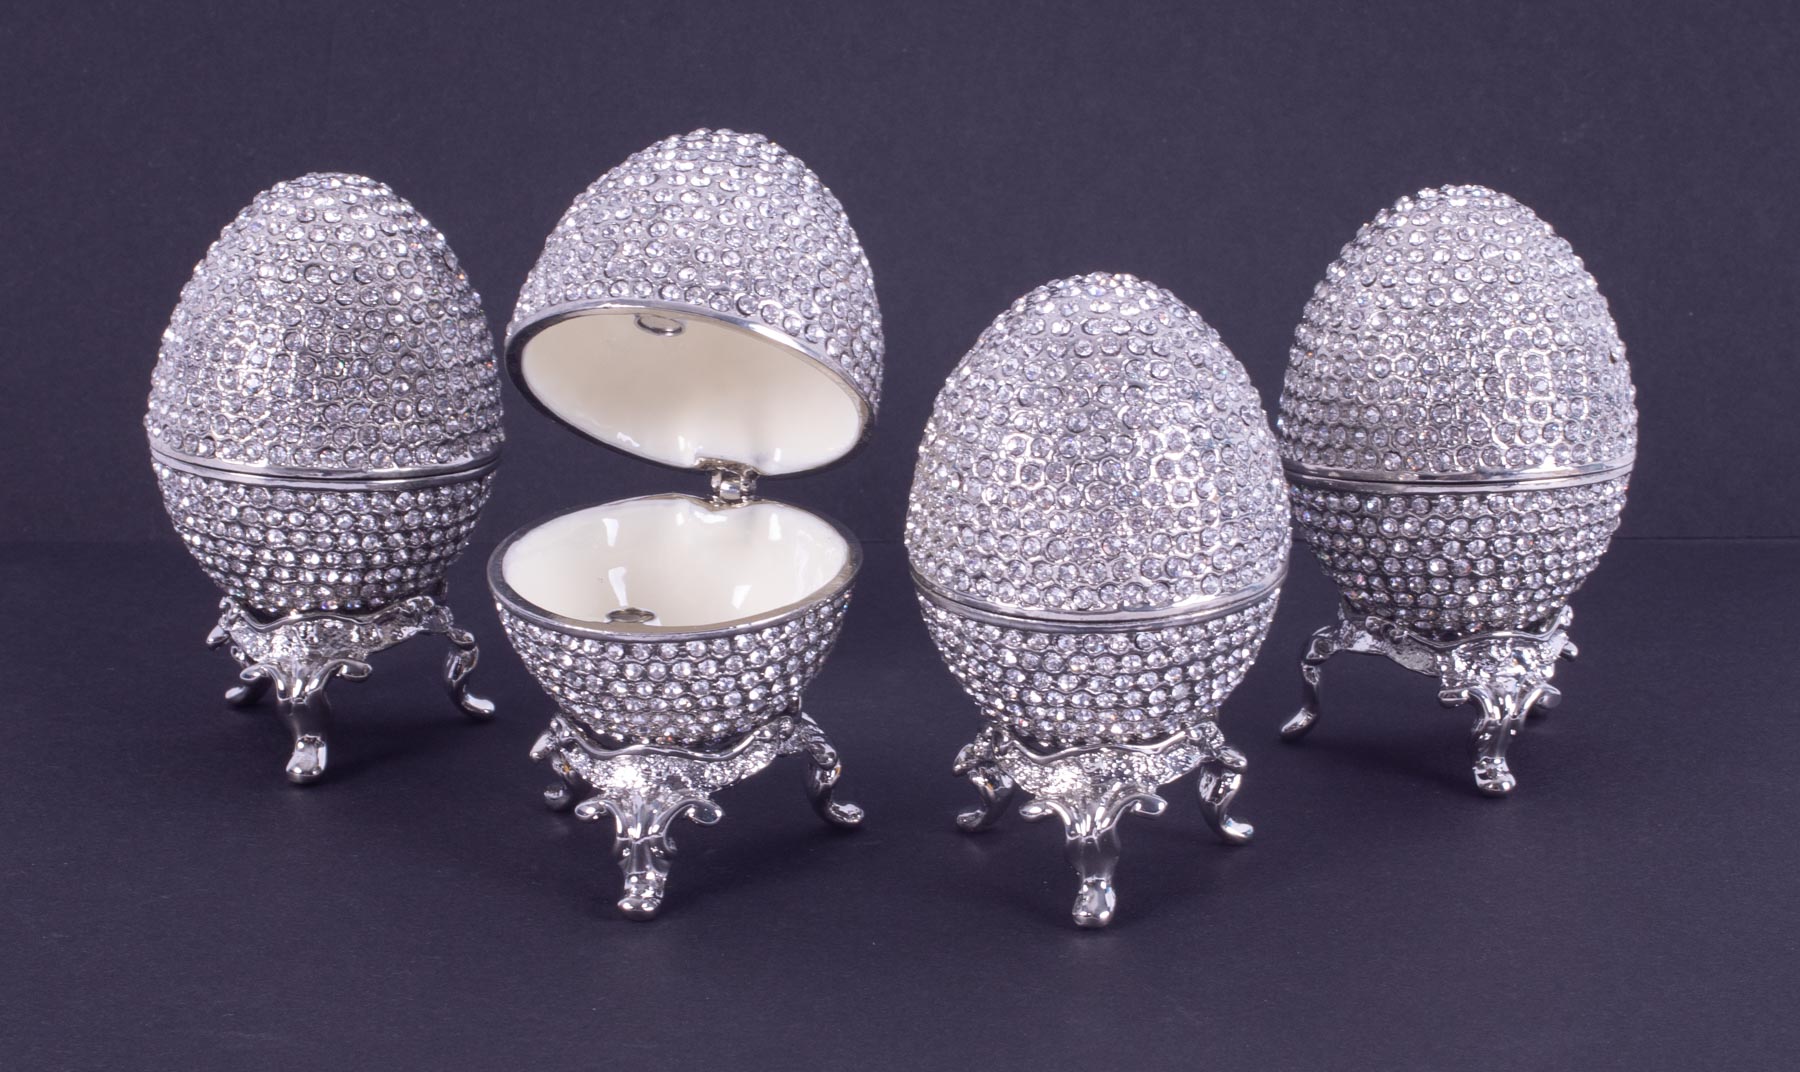 Swarovski Crystal 'style' eggs on stands (4).